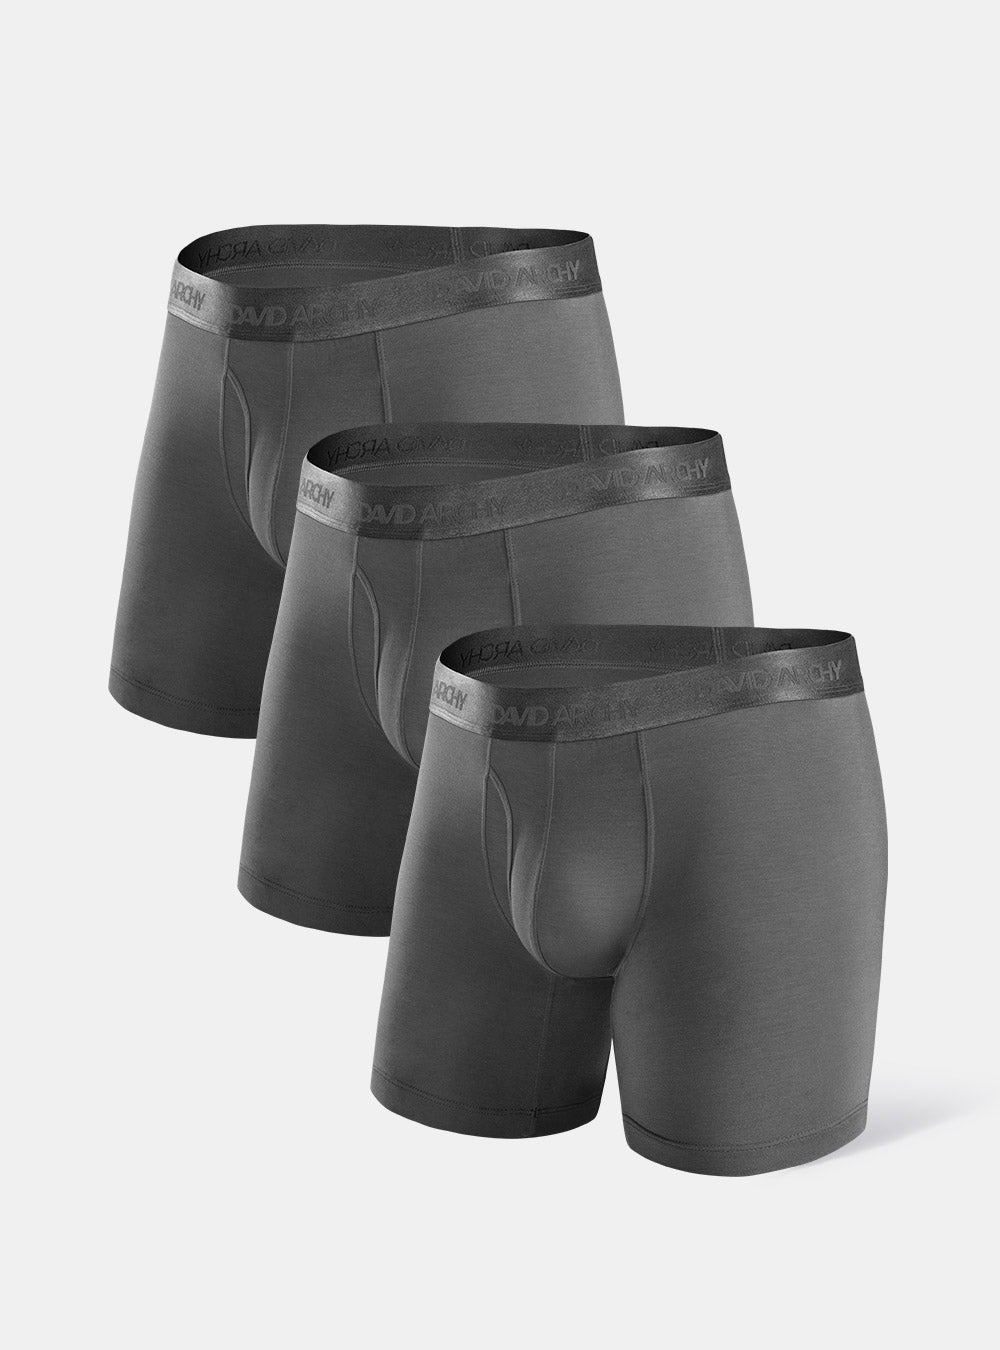 DAVID ARCHY Men's 4 Pack Micro Modal Separate Dual Pouch Briefs with Fly